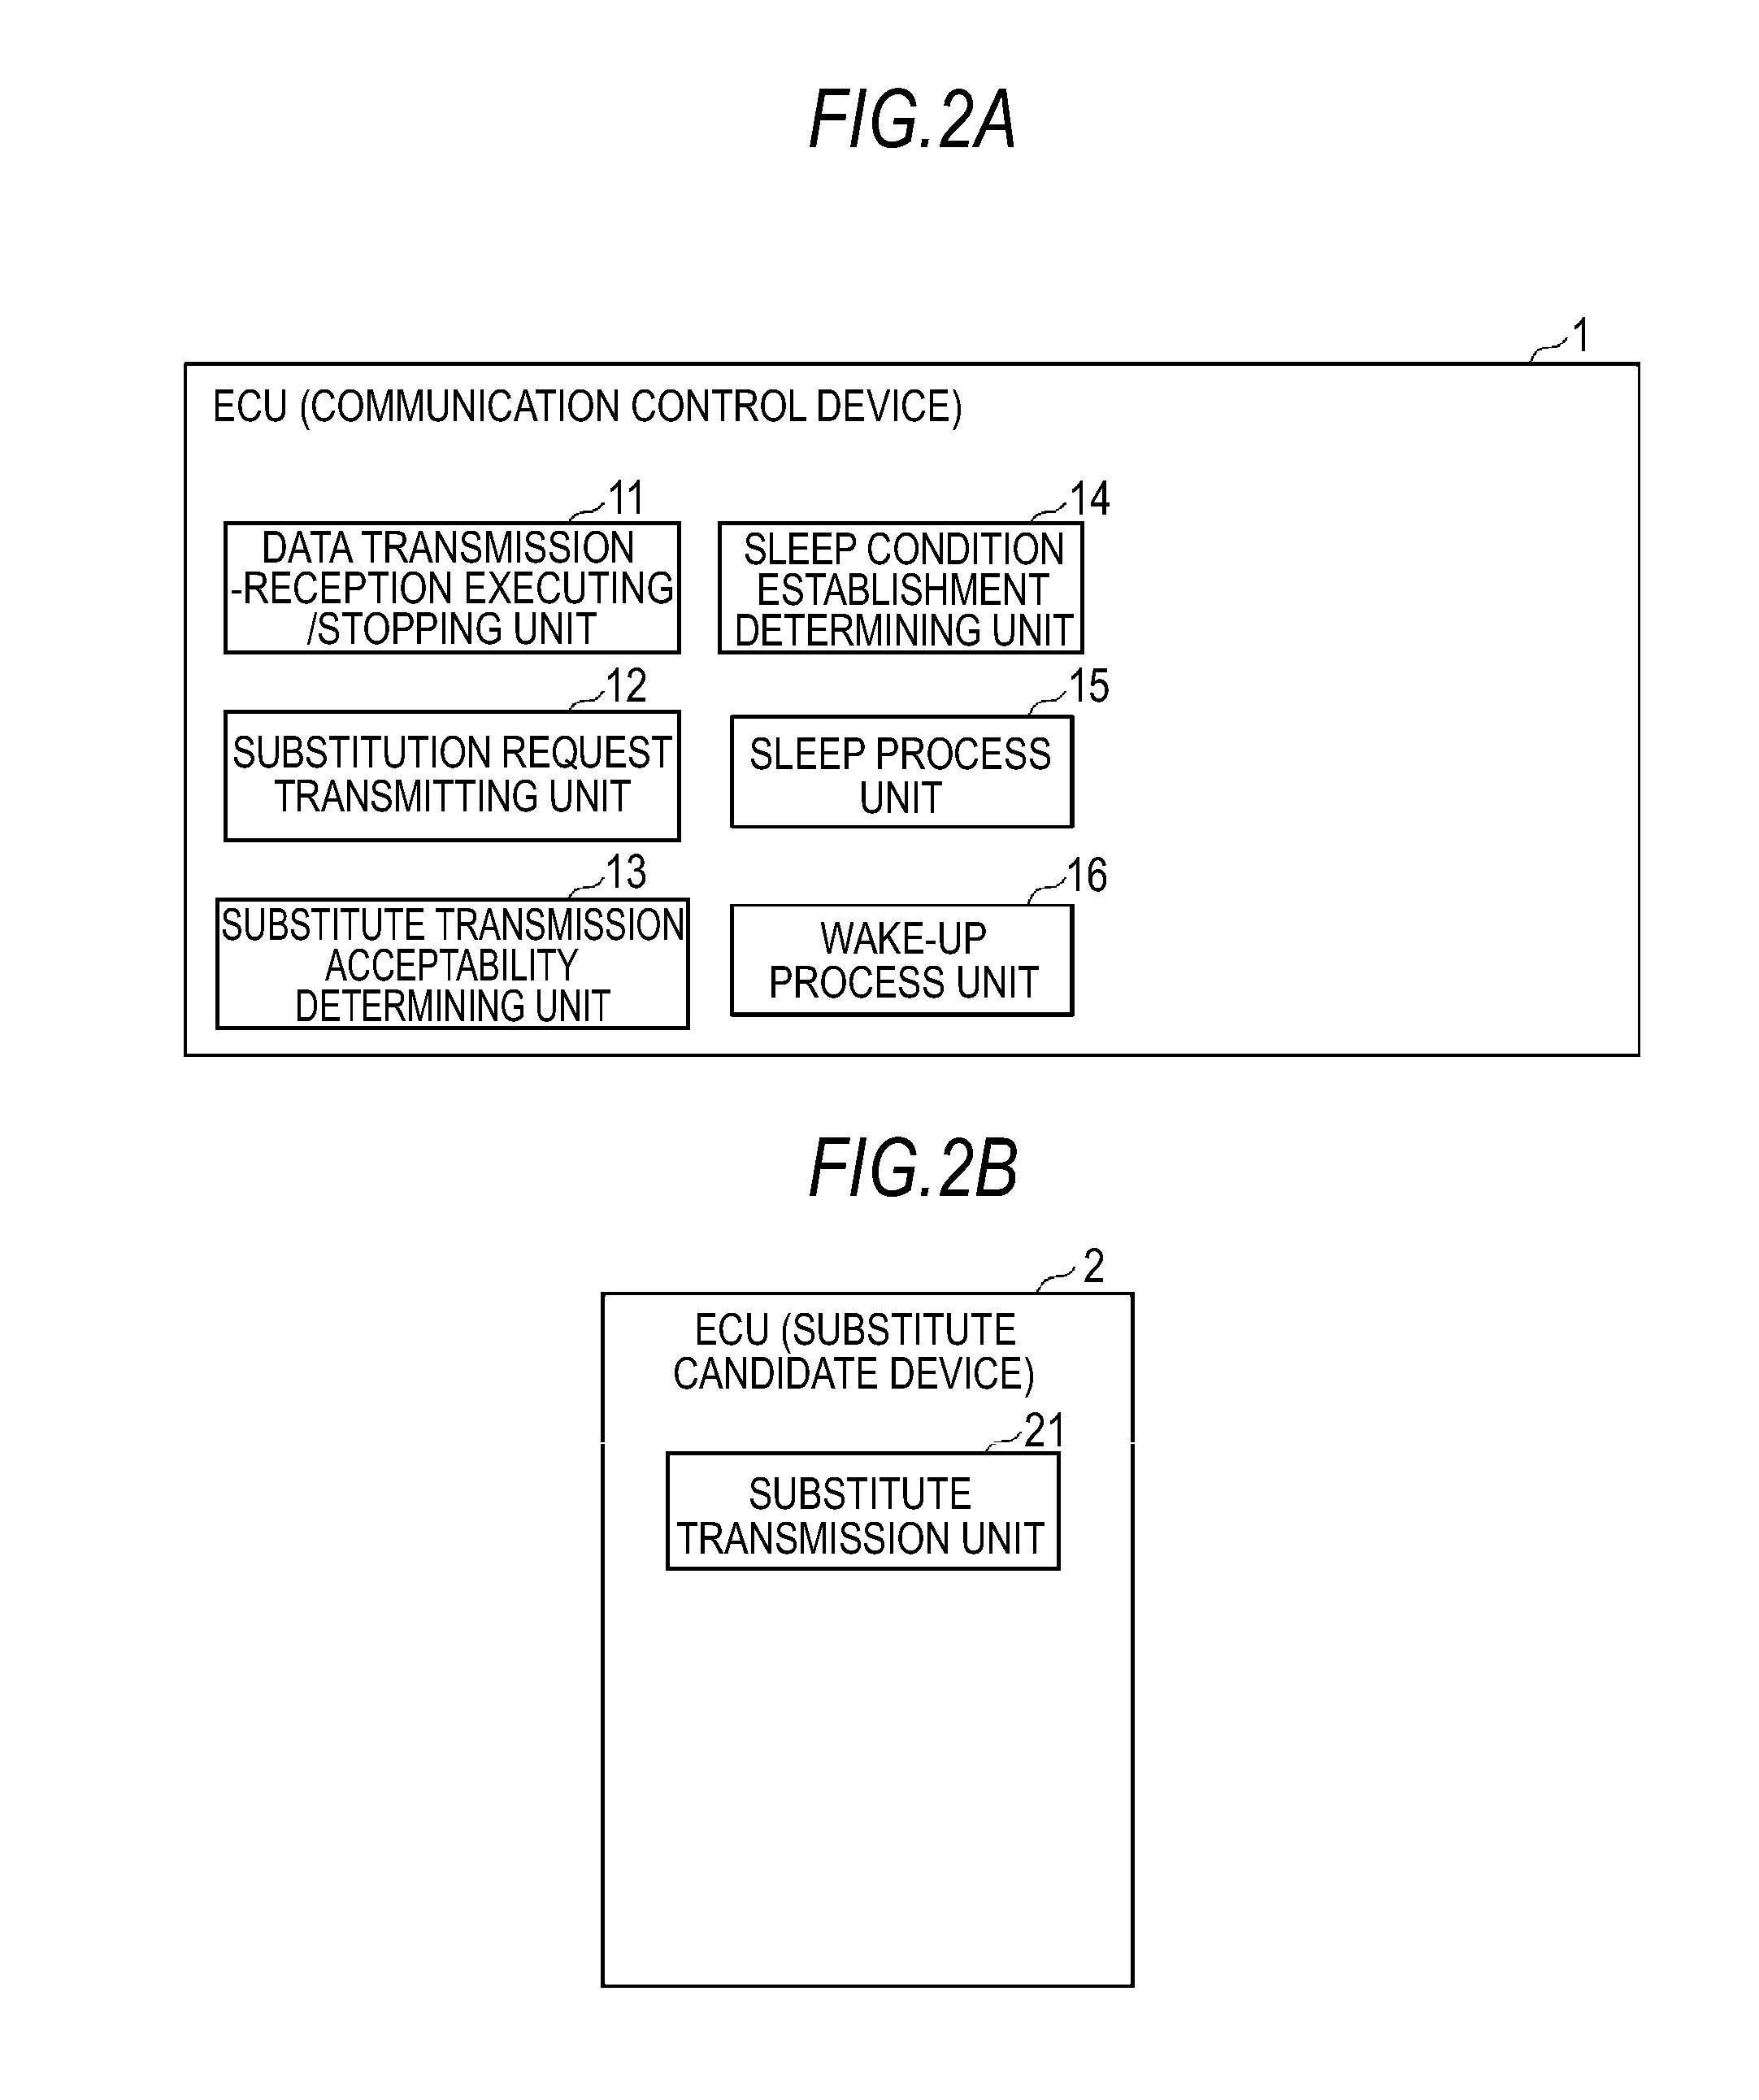 Control device switching system